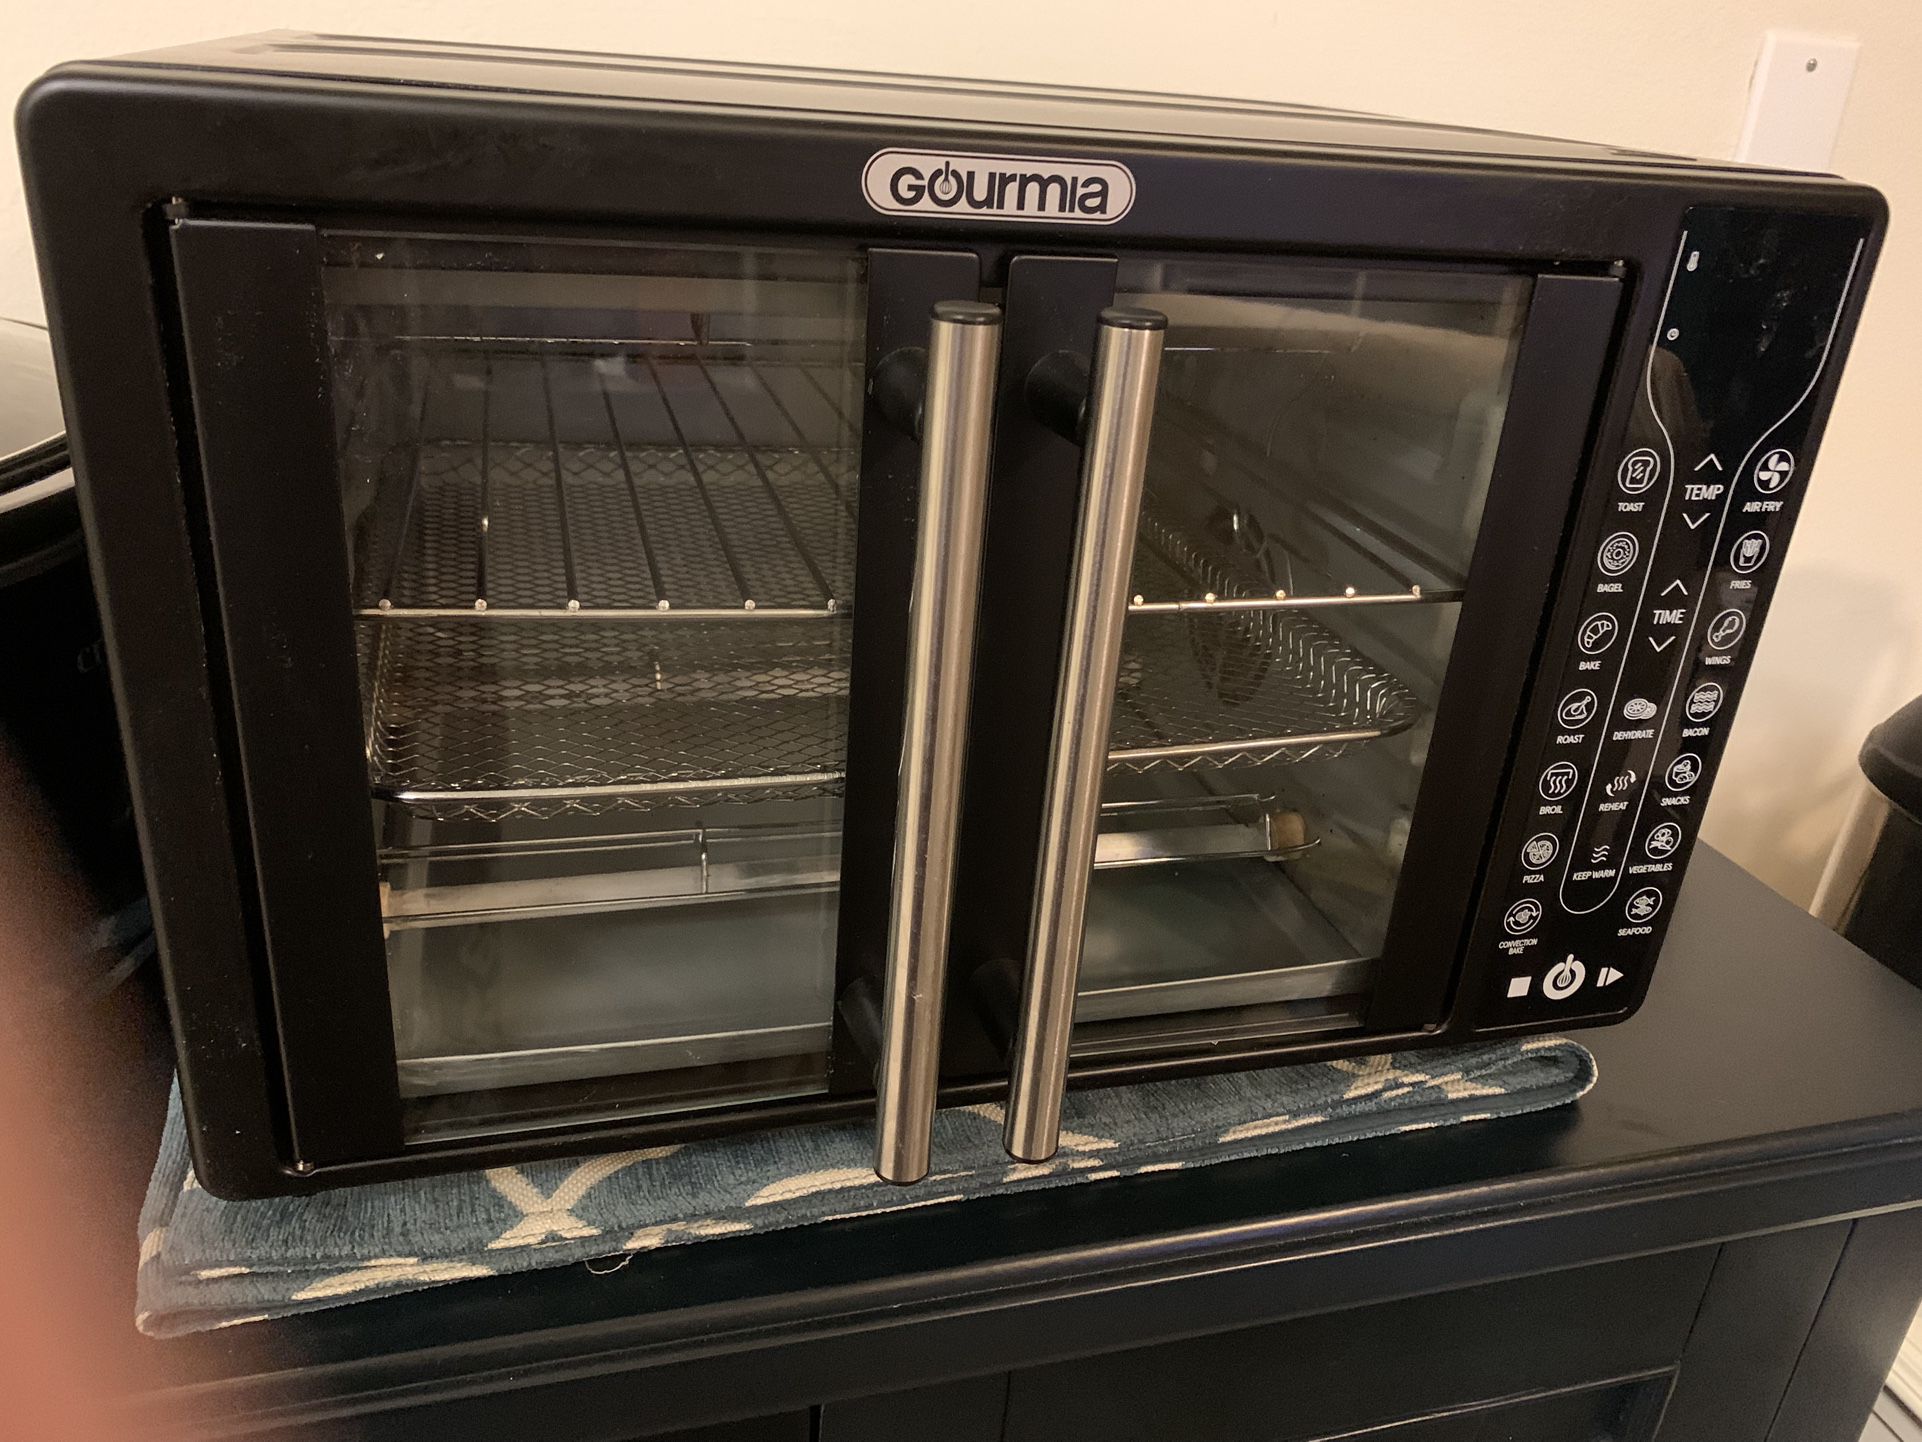 Fryer, Convention, Oven, Dehydrator. Toaster Oven, Air fryer, convention oven, dehydrator.